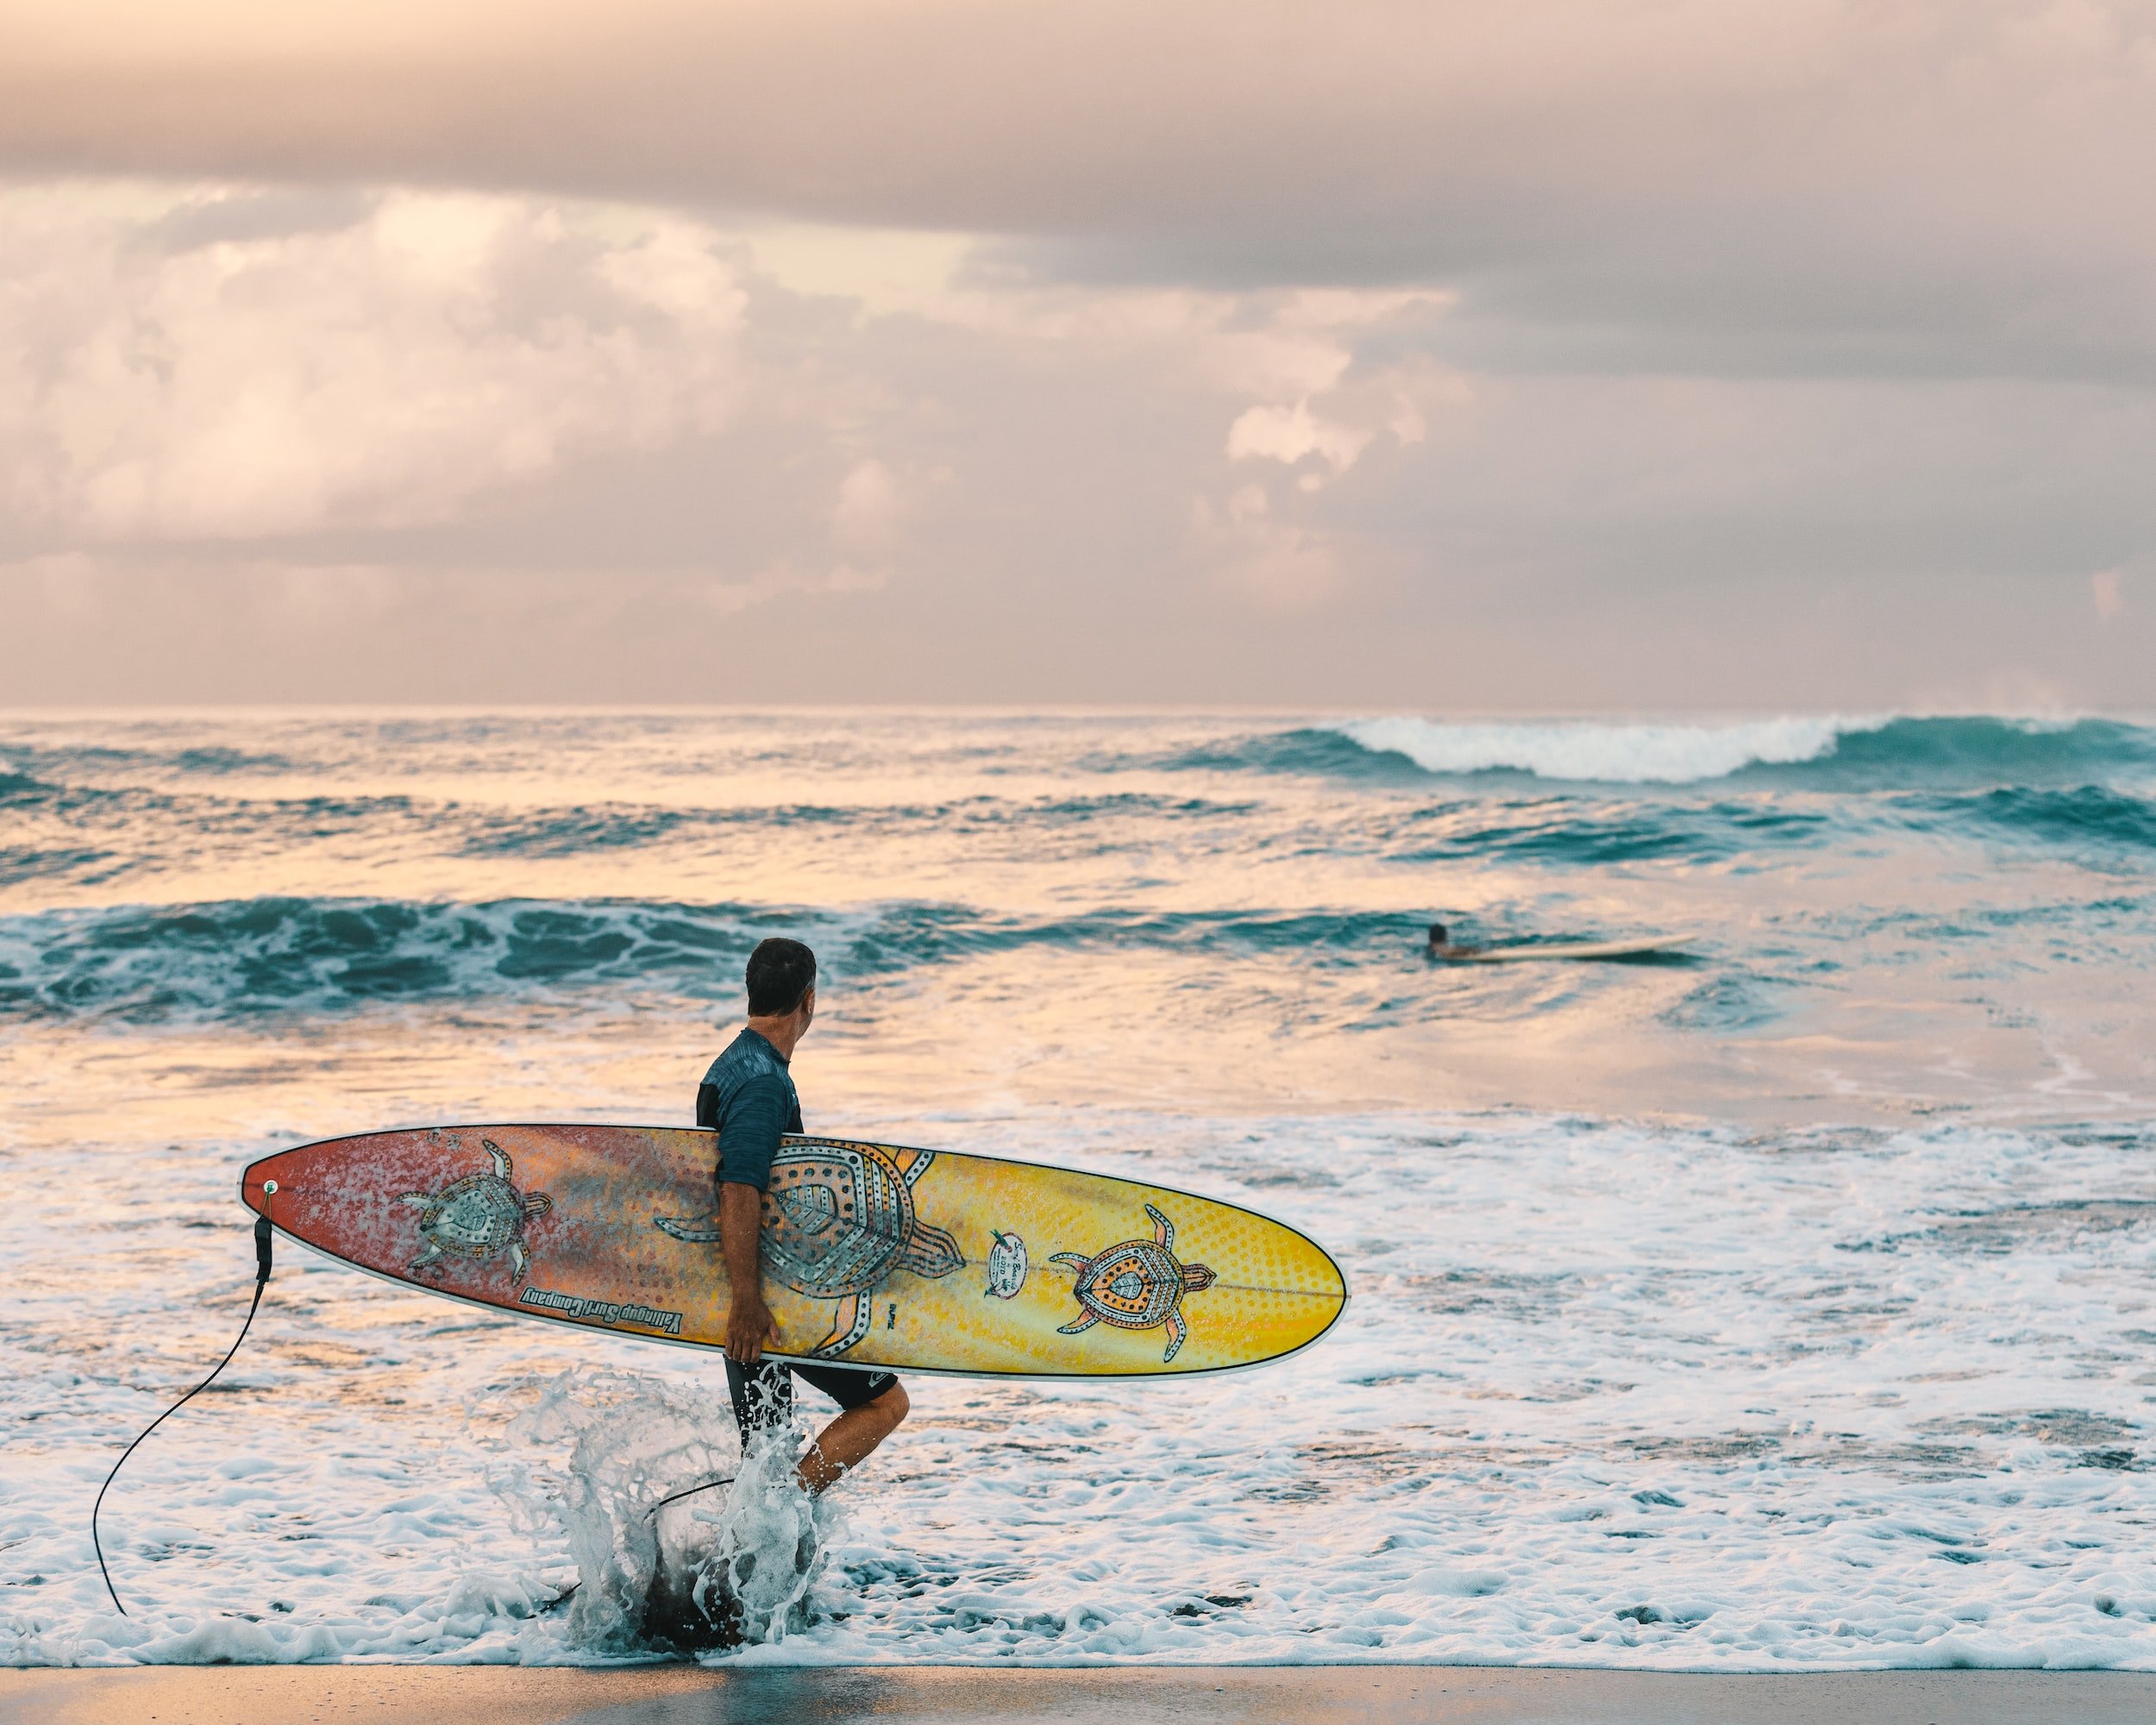 What is the best month to go surfing on Bali?